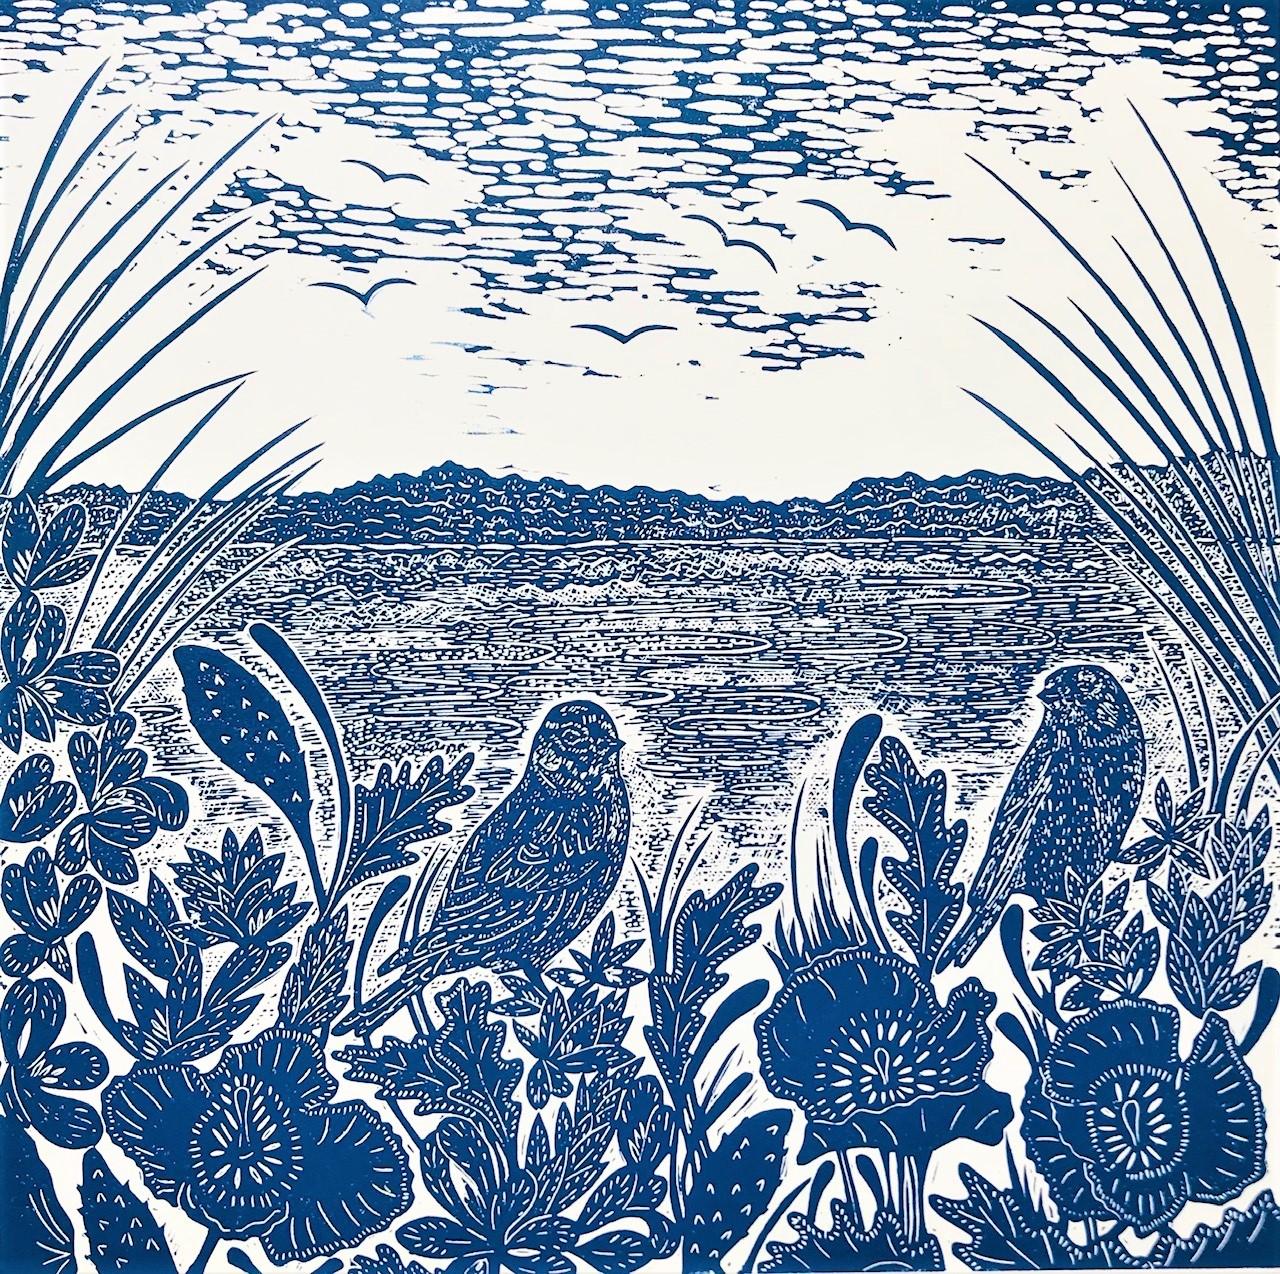 Sea Poppies and Linnets at Salthouse with Linocut, Print by Joanna Padfield